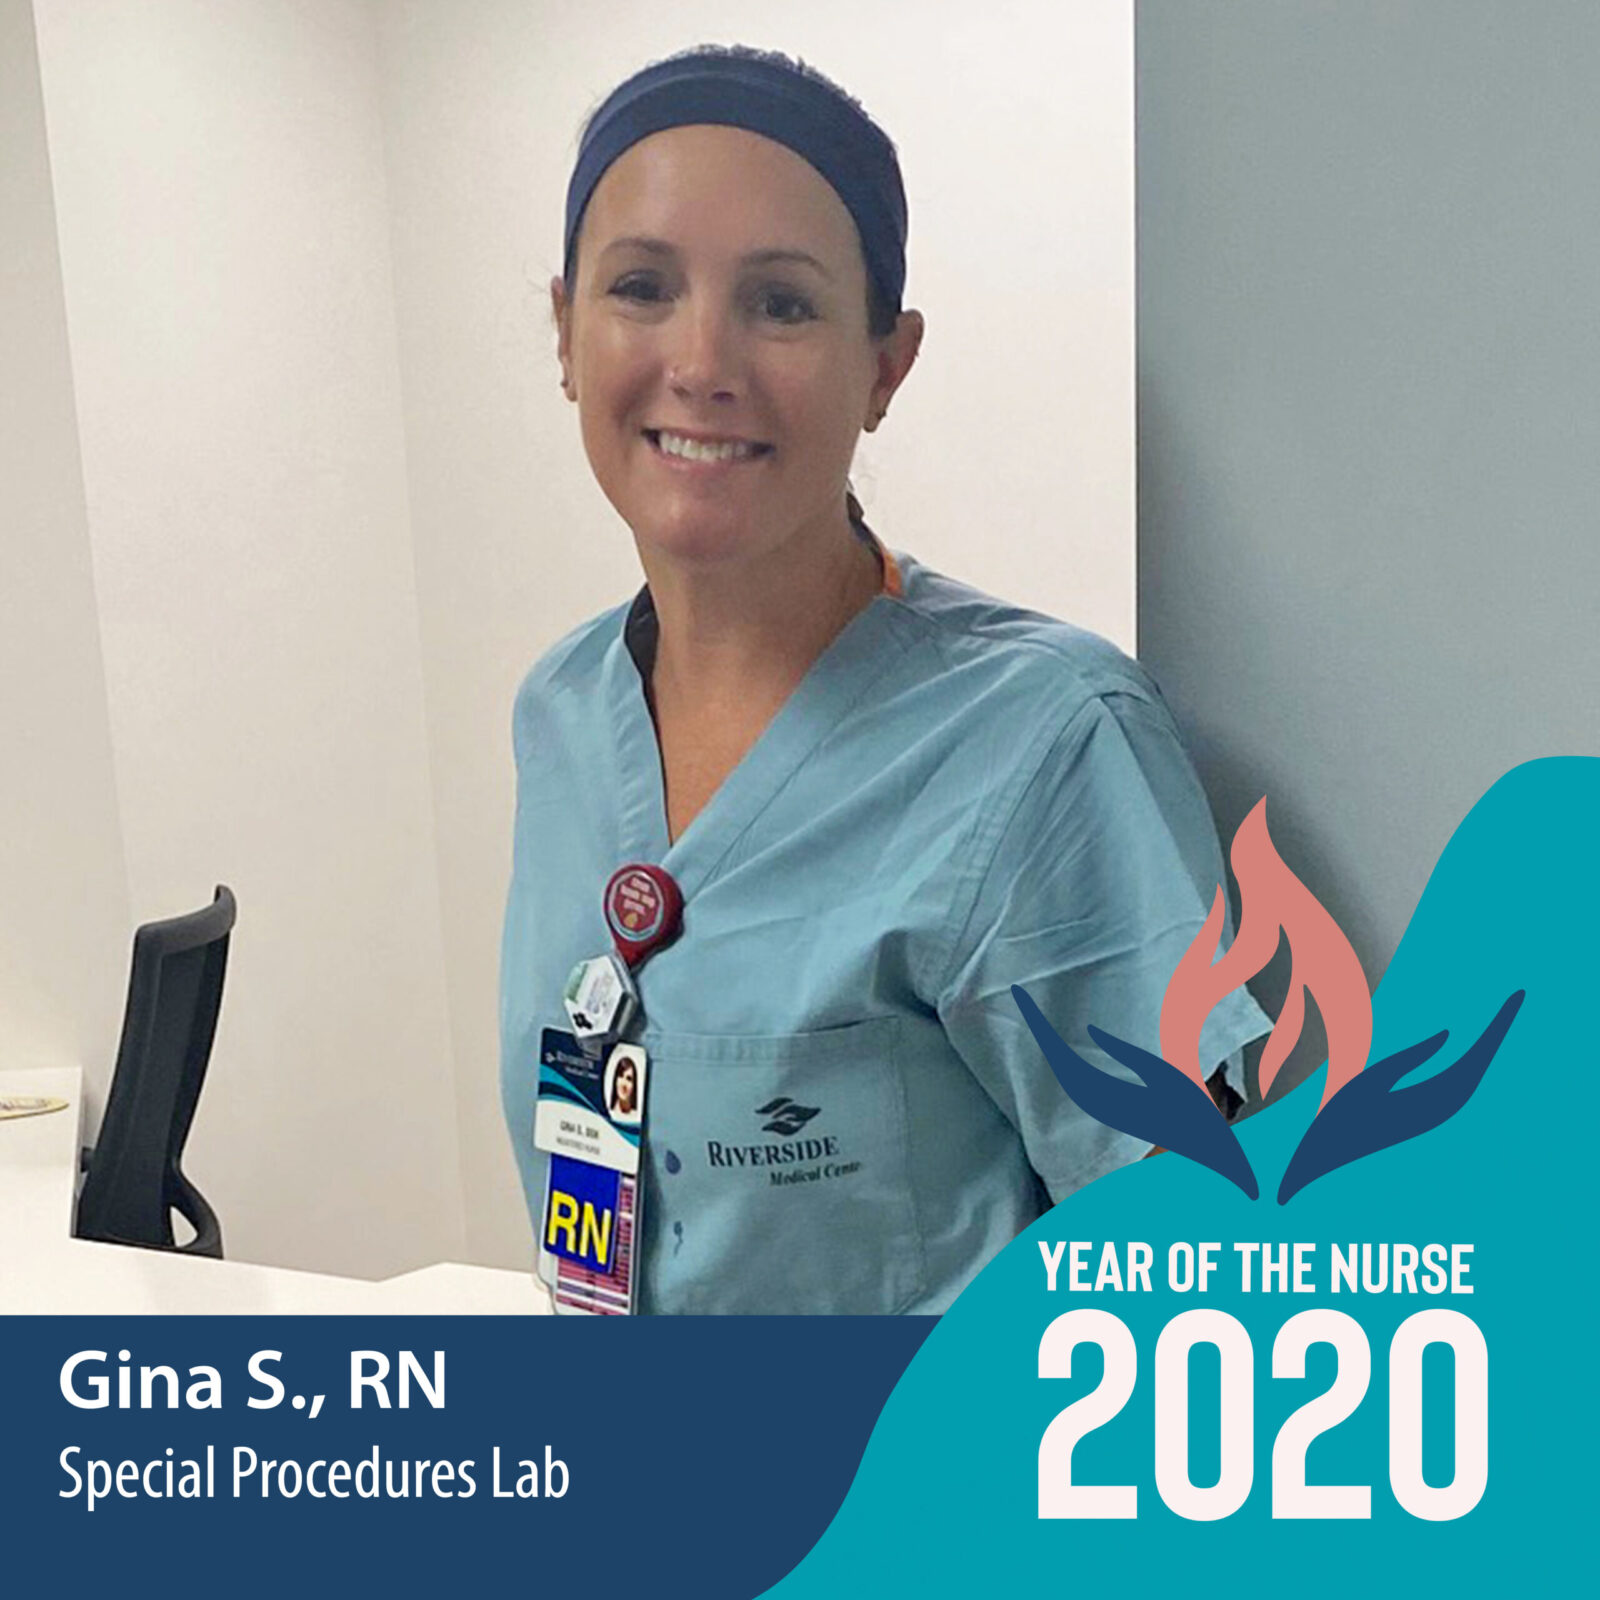 Year of the Nurse Nominee: Gina S., RN